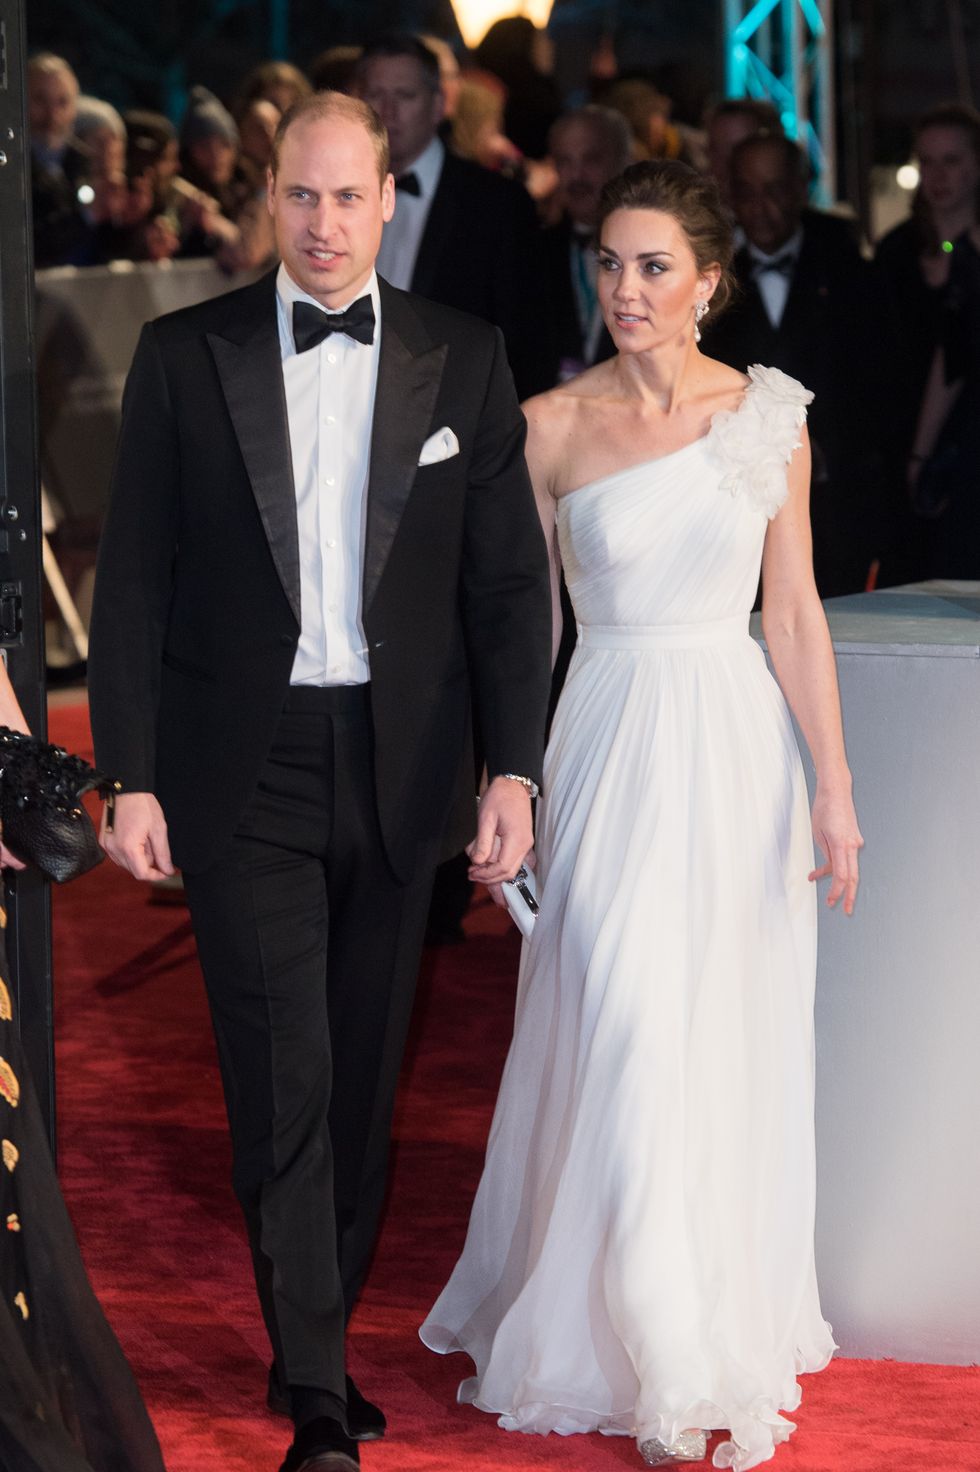 The Princess of Wales goes monochrome for the 2023 BAFTAs